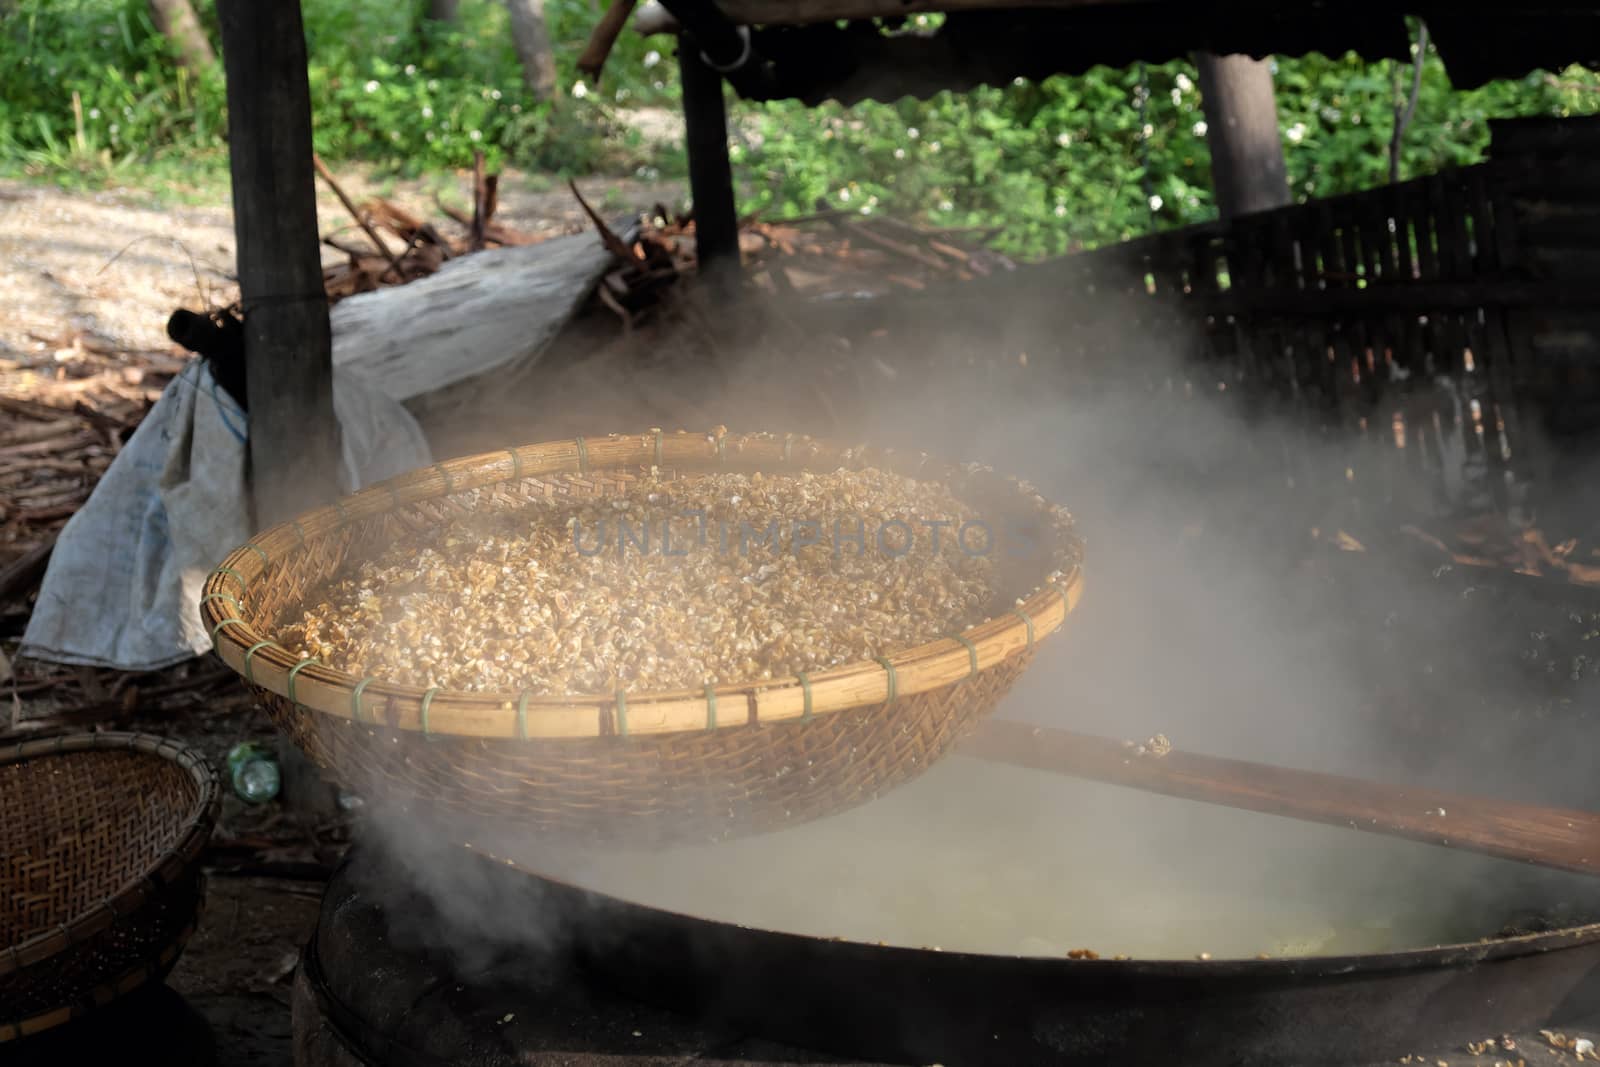 process mussel, cook seafood in boil water then sift mussel pulp from sell, mussel is famous food in Hoian, Vietnam